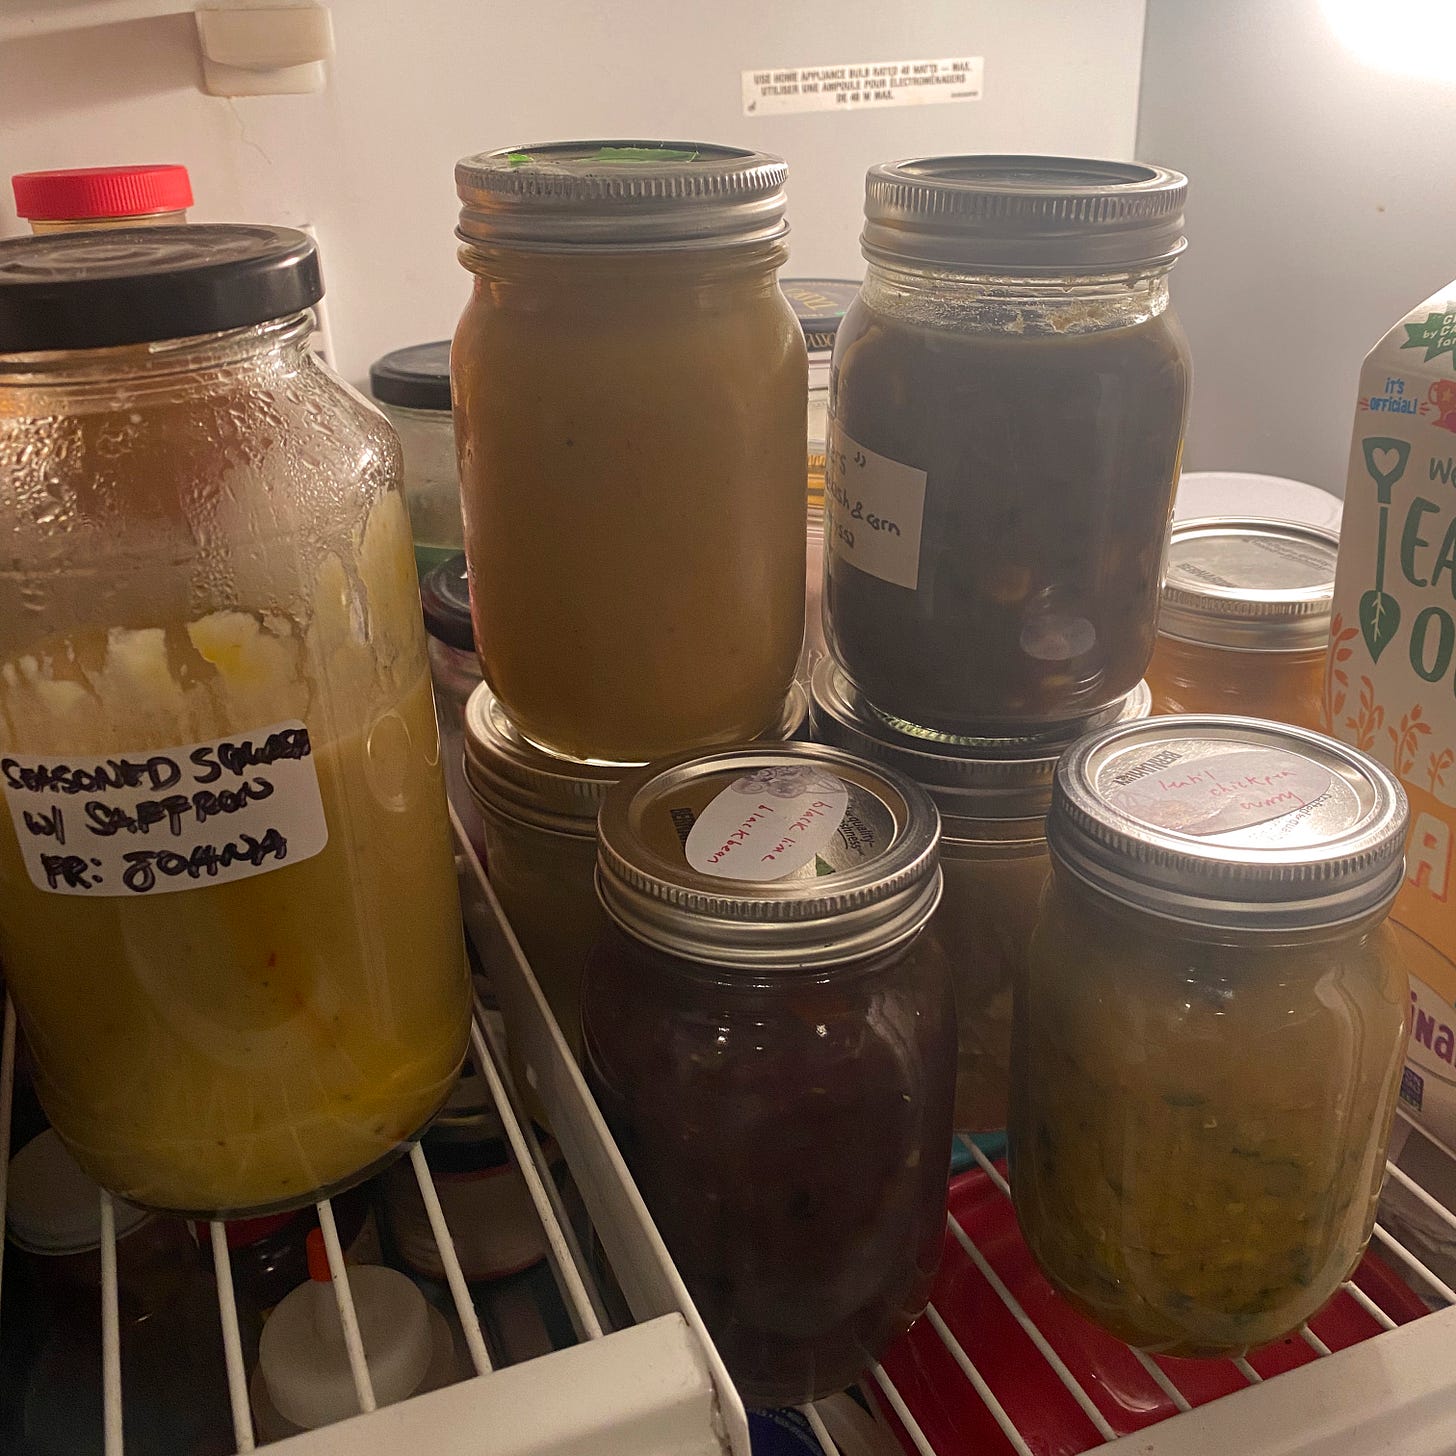 Several jars of various different soups on the top shelf of a fridge.